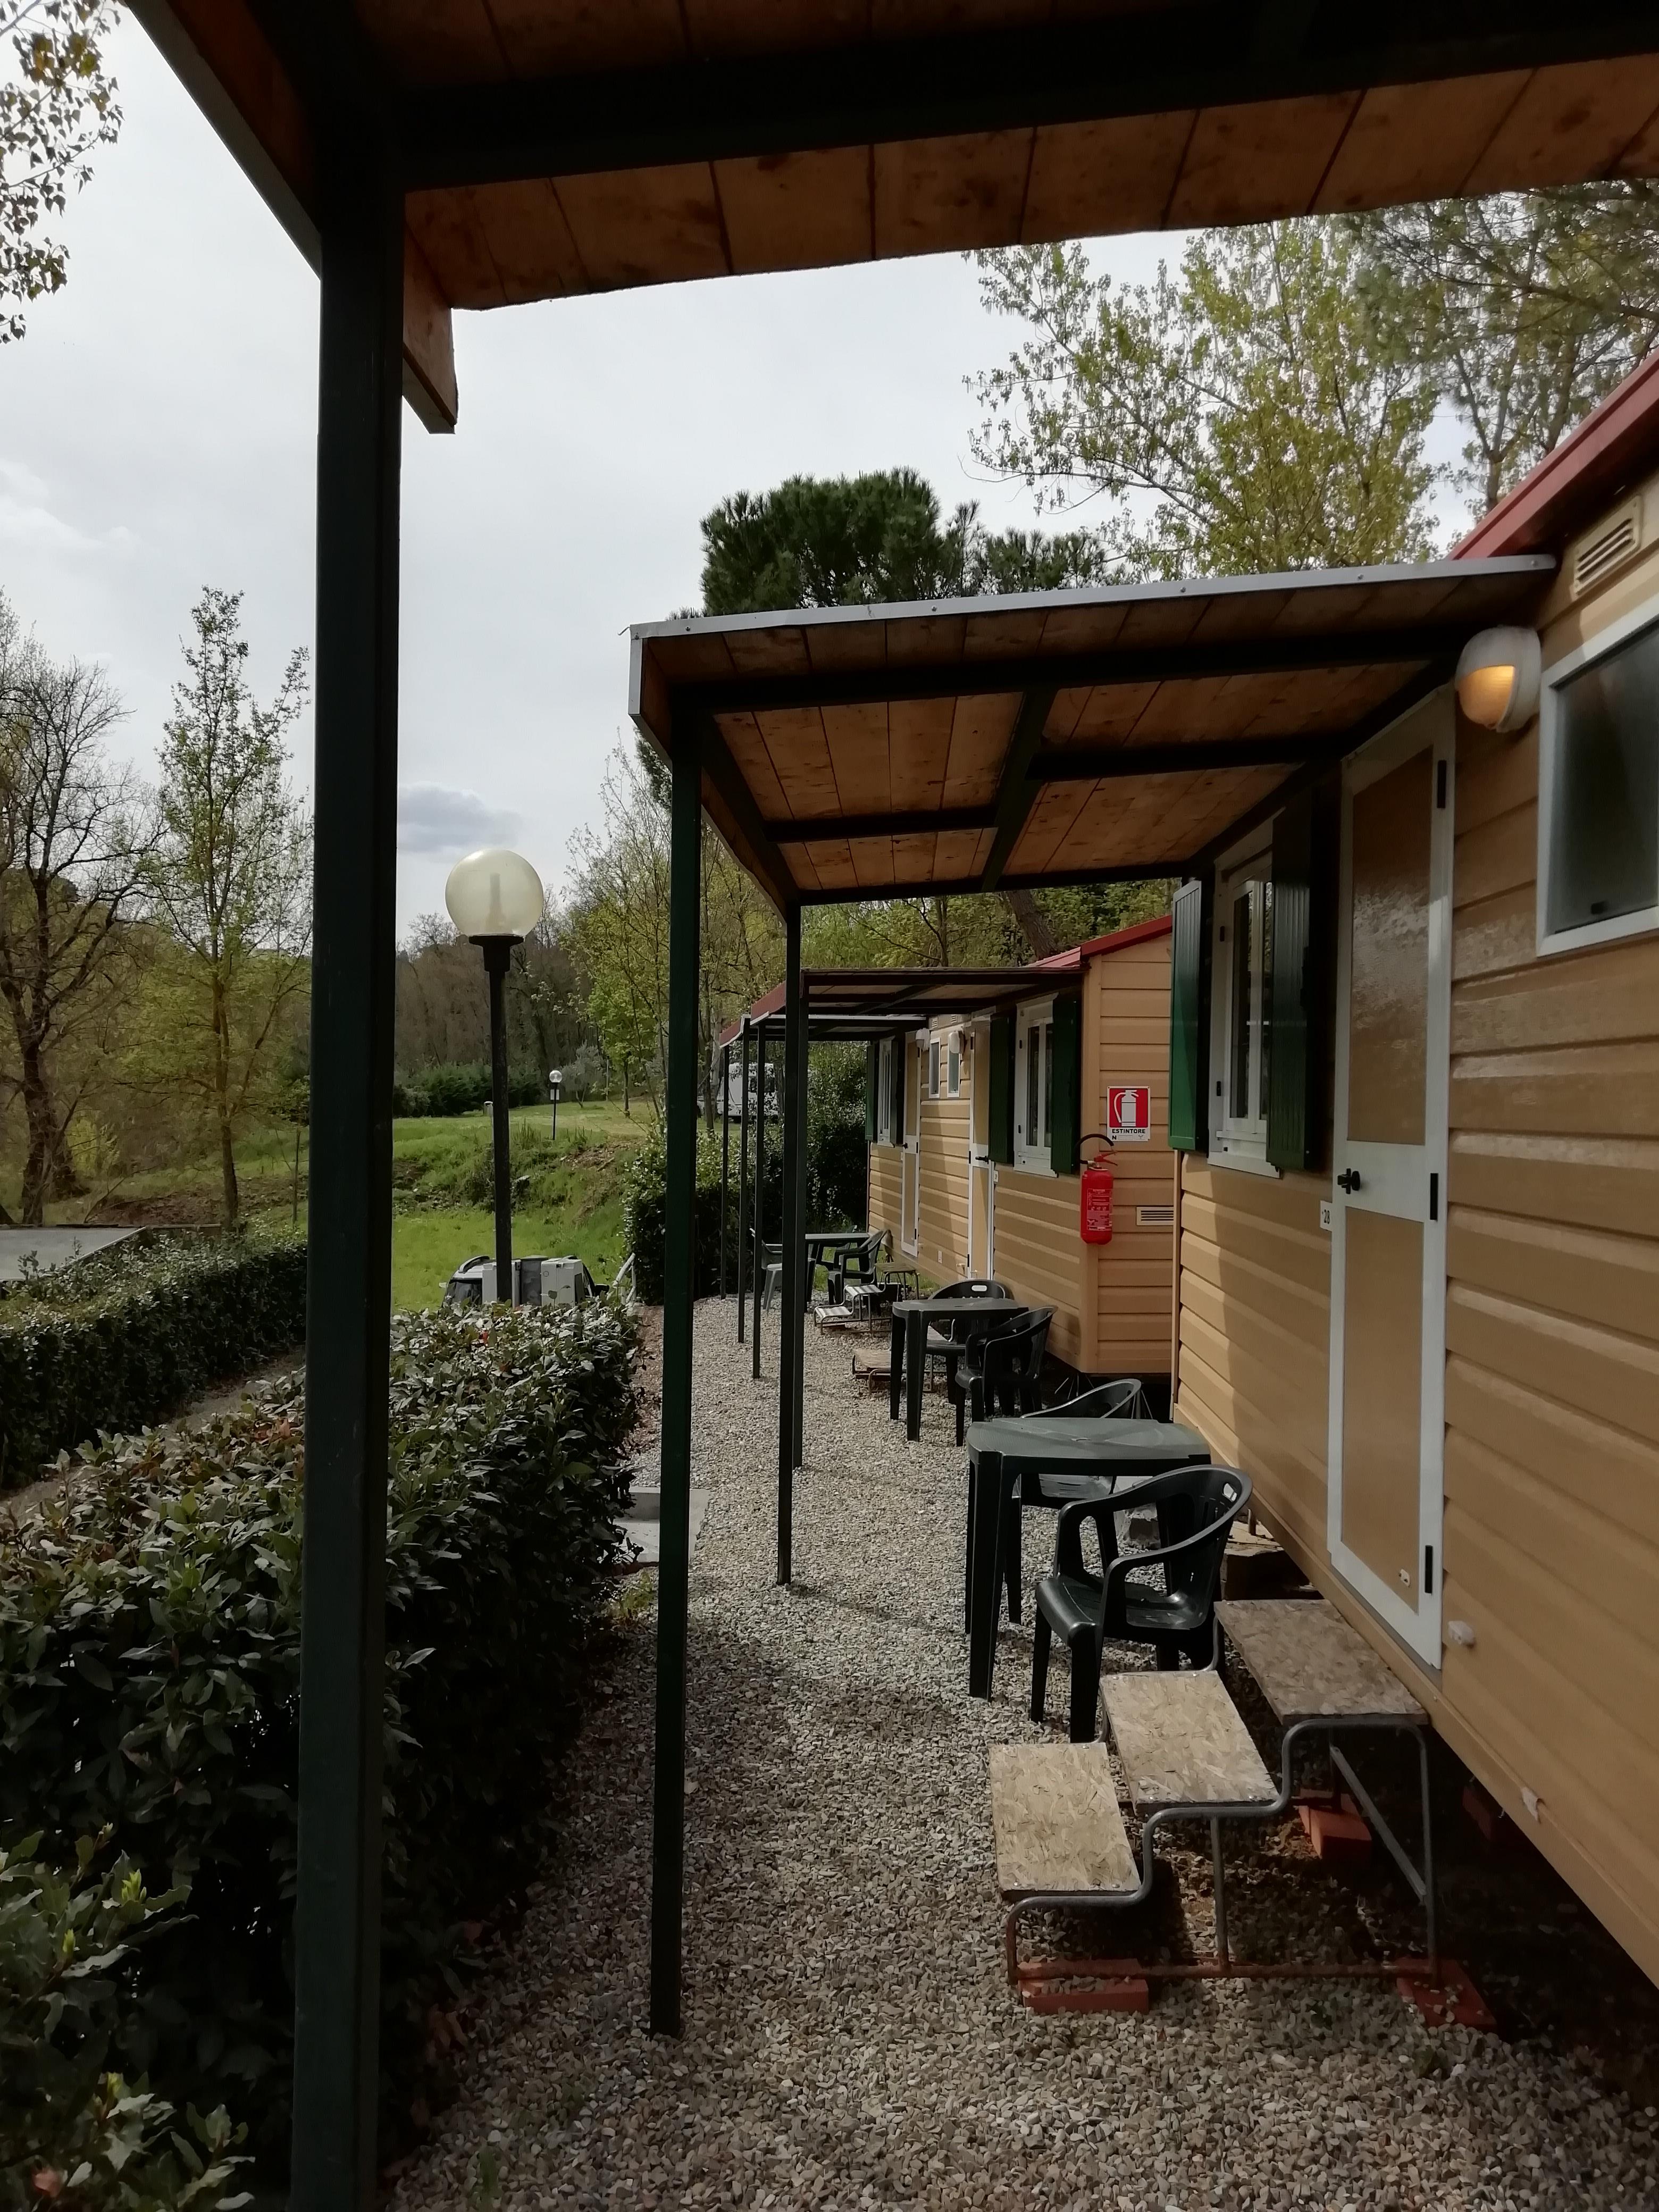 Kwatera - Mobile Home With One Room - Camping Village Internazionale Firenze